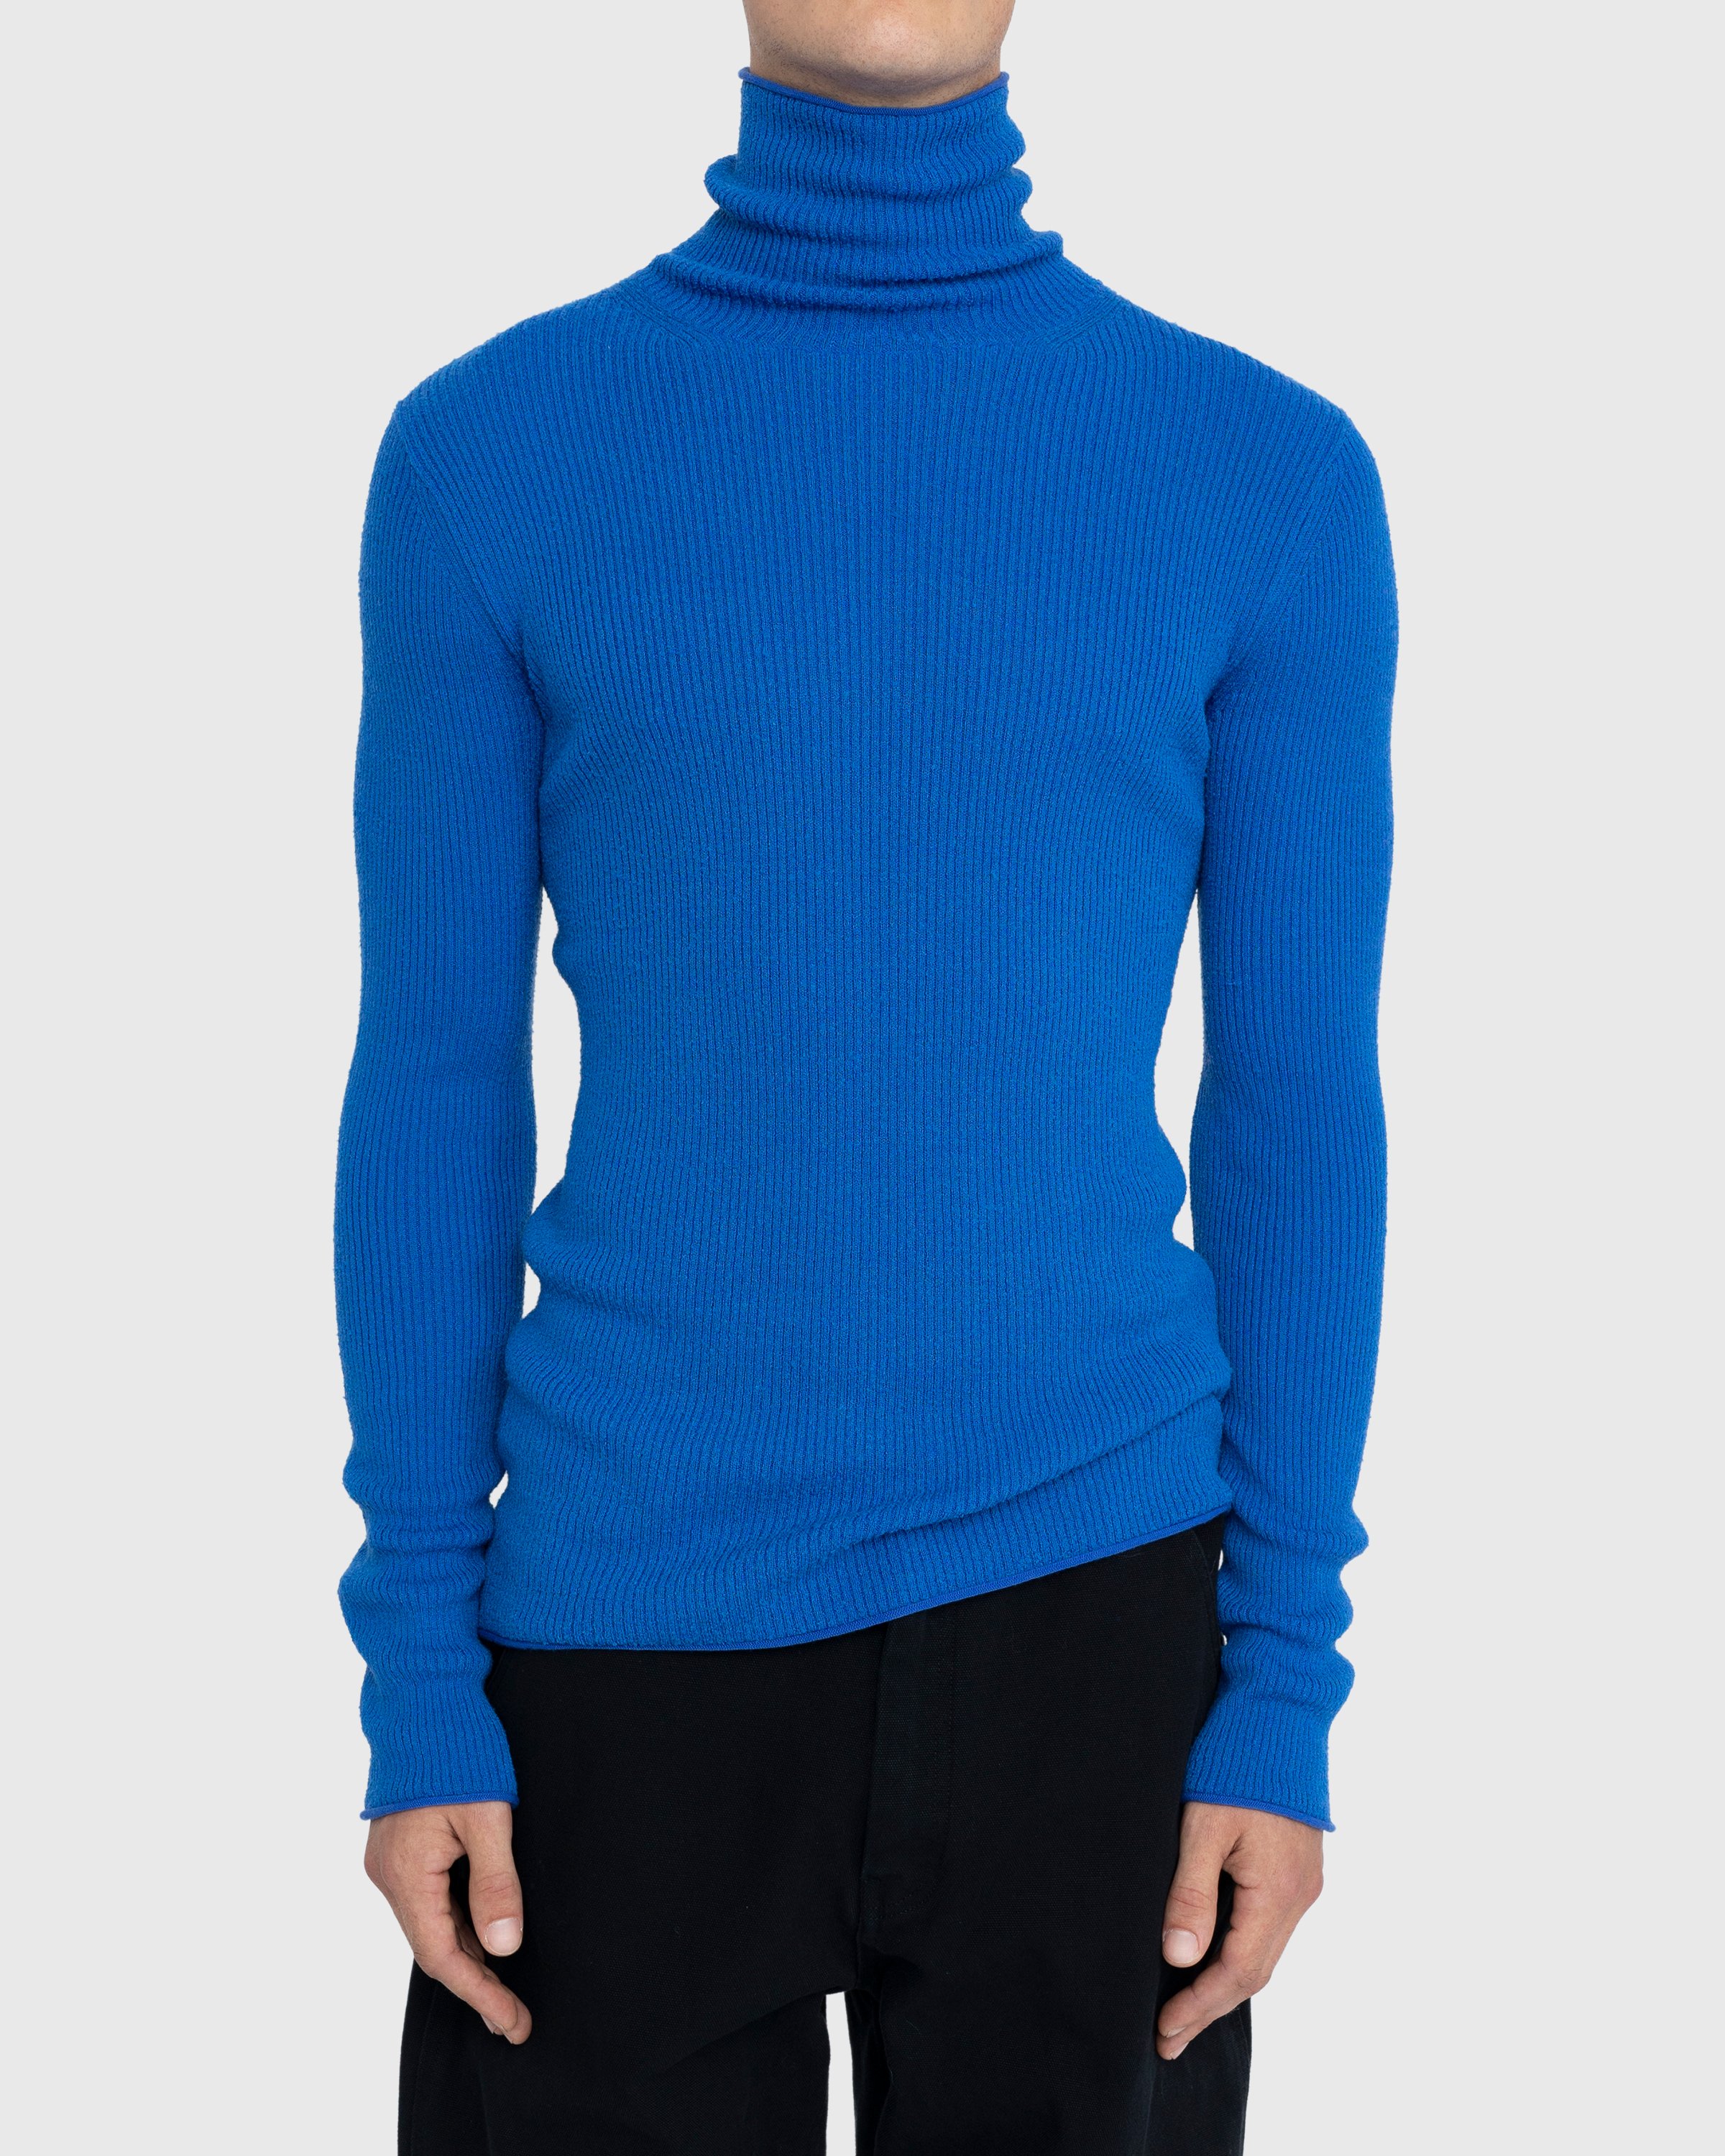 Acne Studios - Roll Neck Ribbed Knit Sweater Ultramarine Blue - Clothing - Blue - Image 2